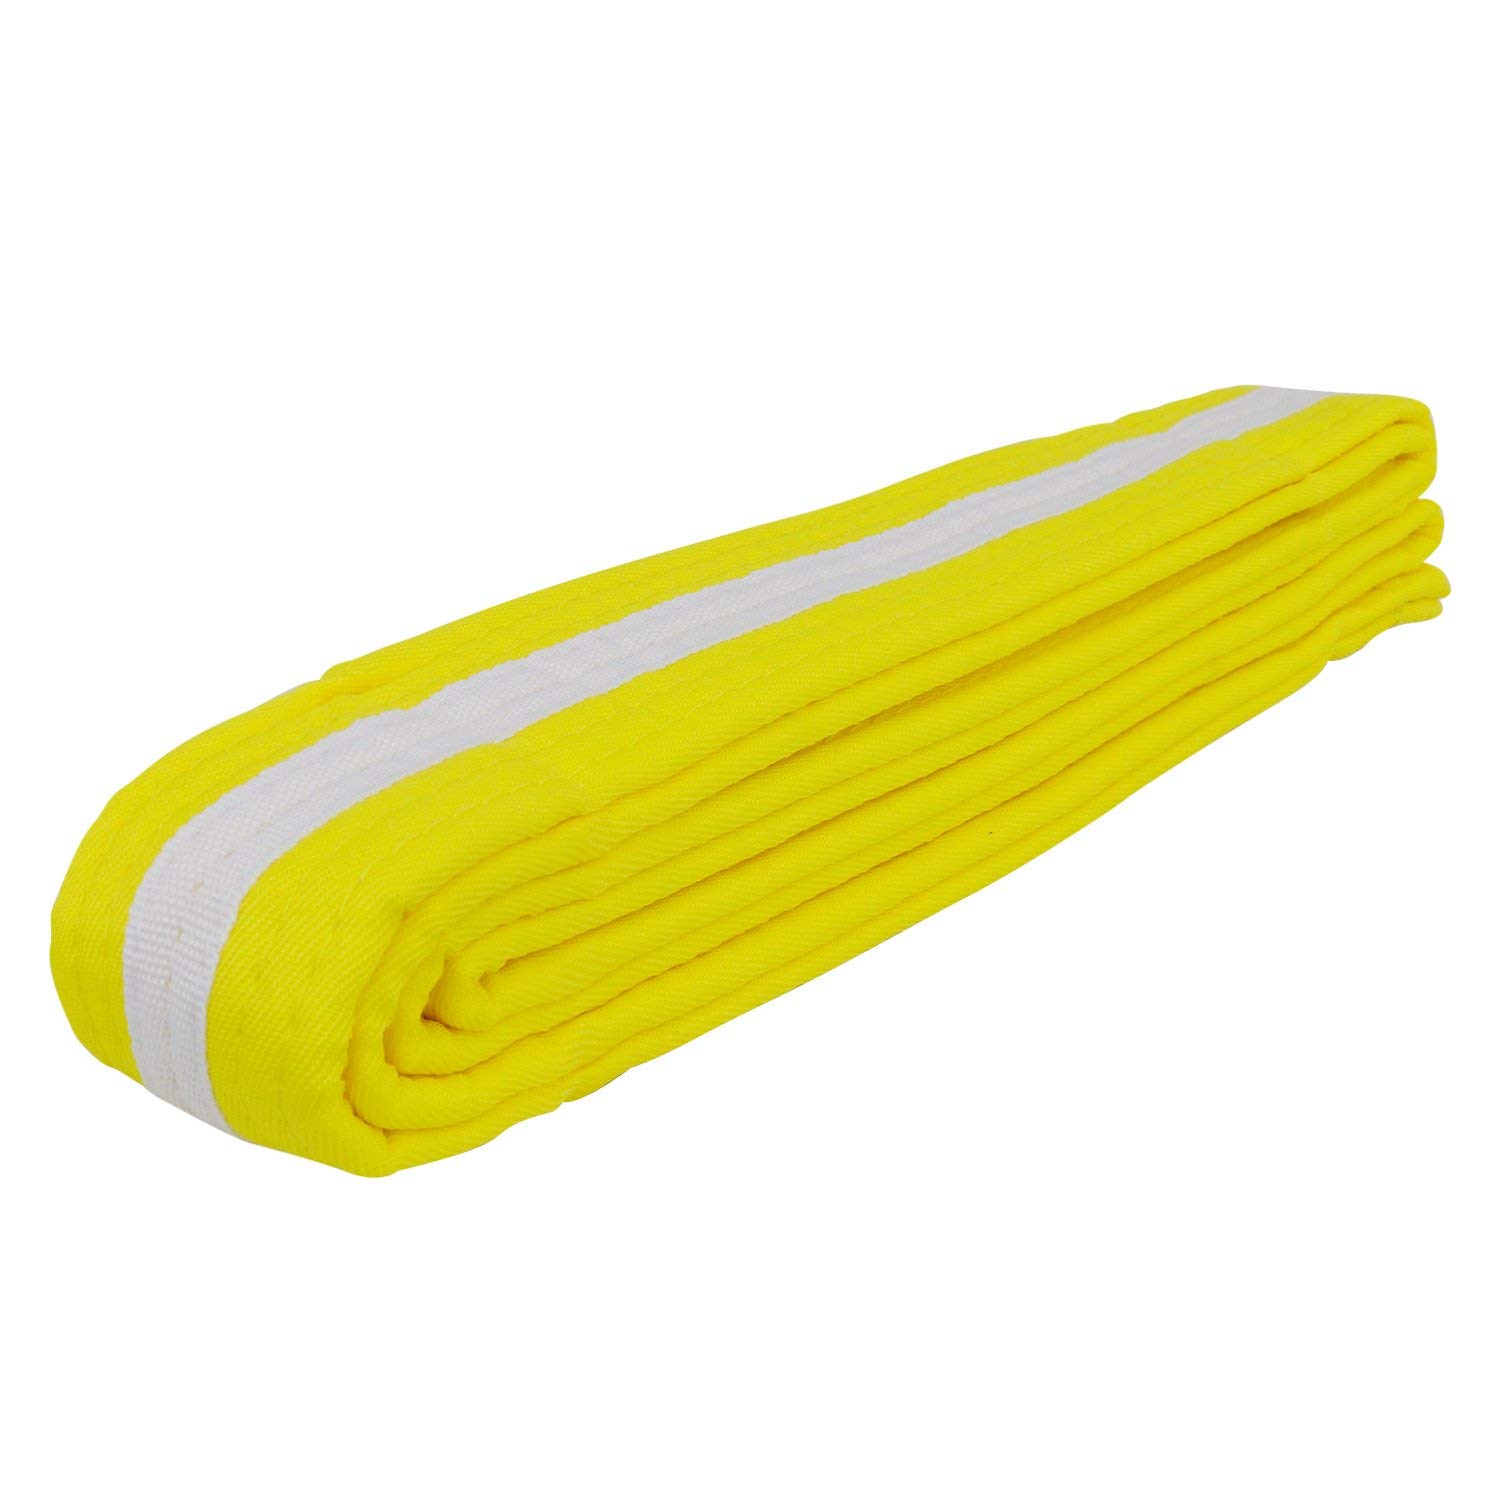 AAMA Color Belts with White Stripe for Martial Arts - Taekwondo Karate Judo - Yellow - Size 5